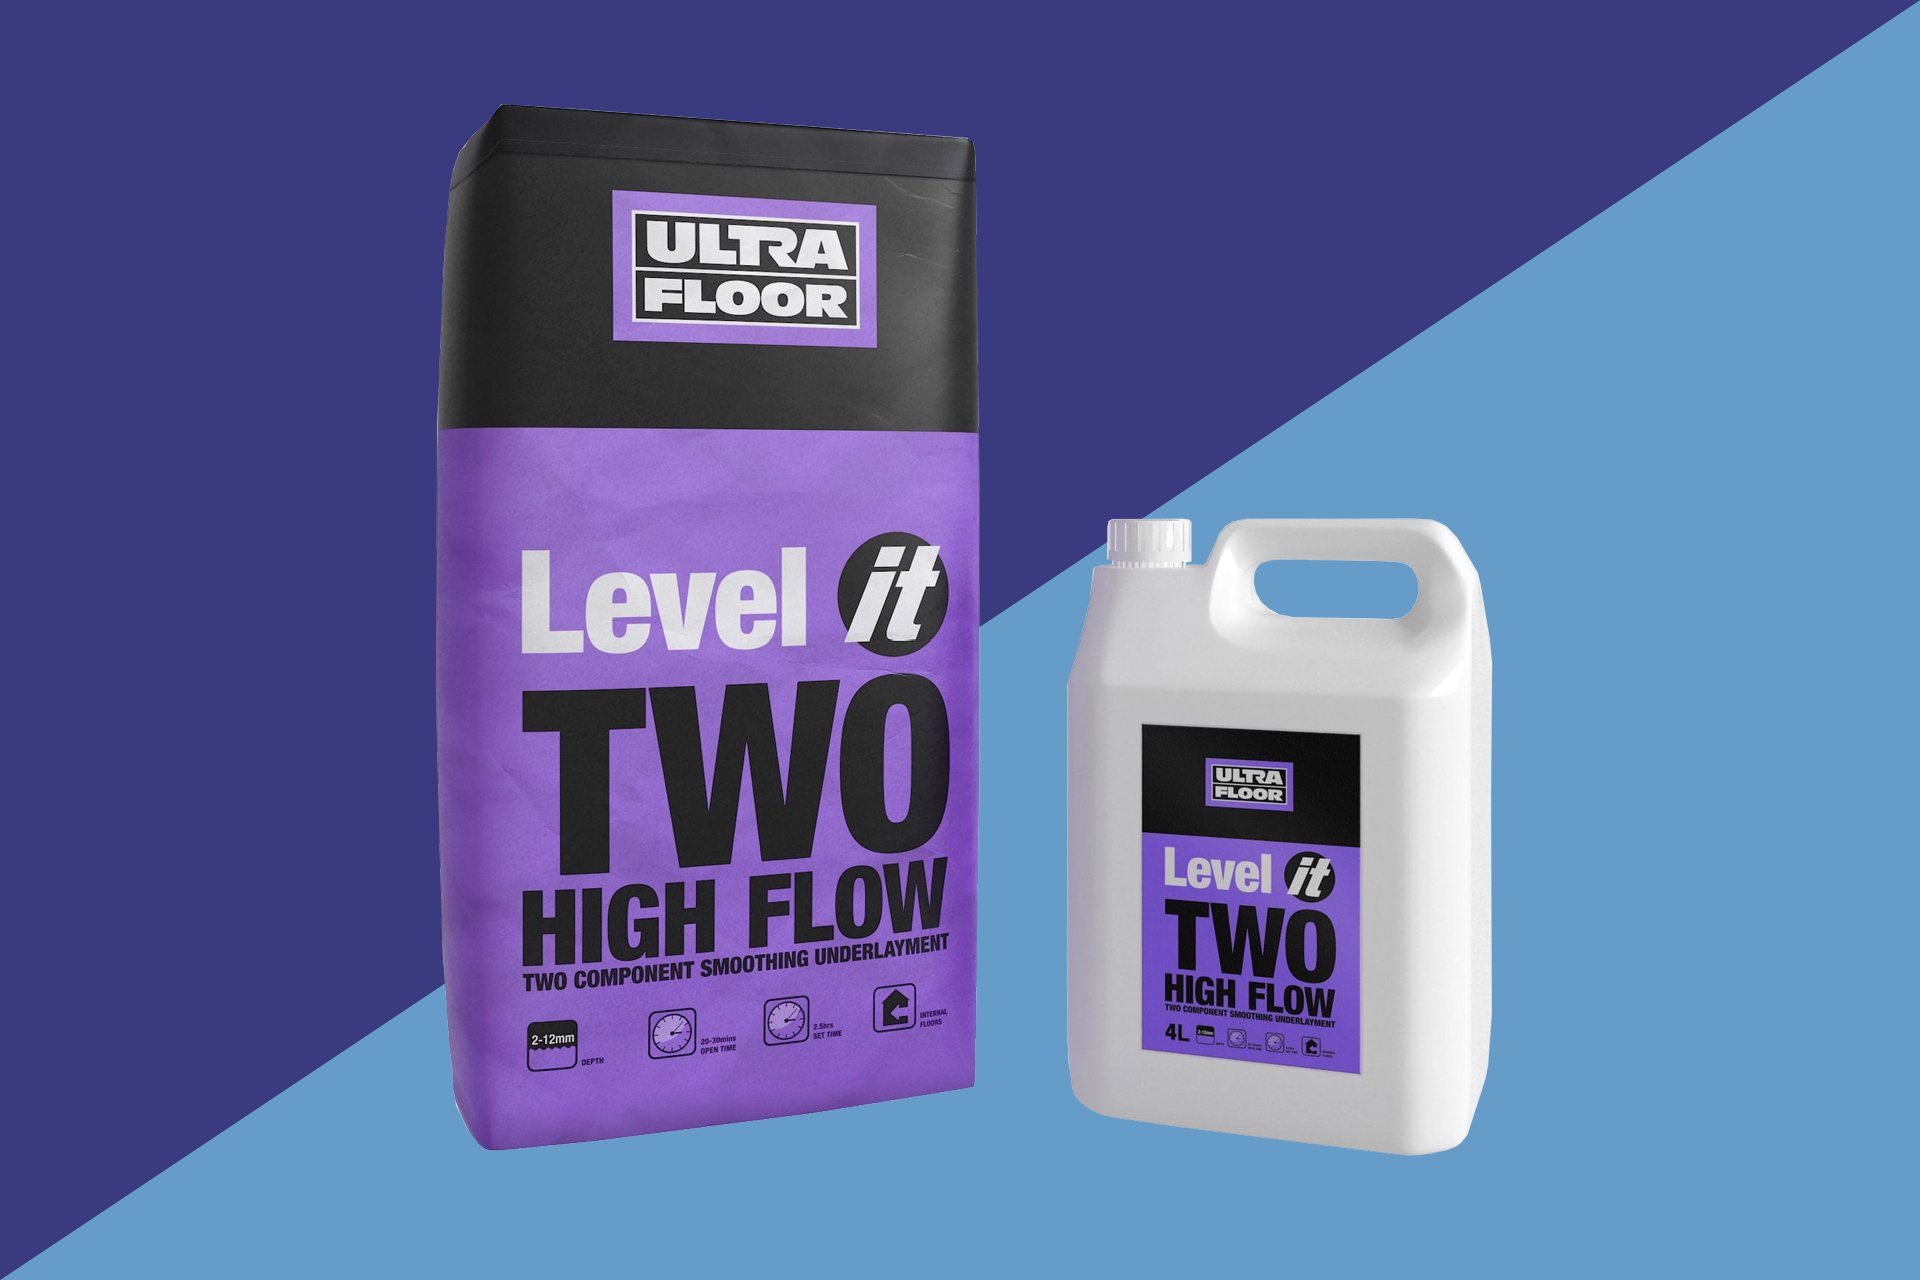 Level IT Two Smoothing Compound from Ultrafloor - Flooring Supplies from Ambiance